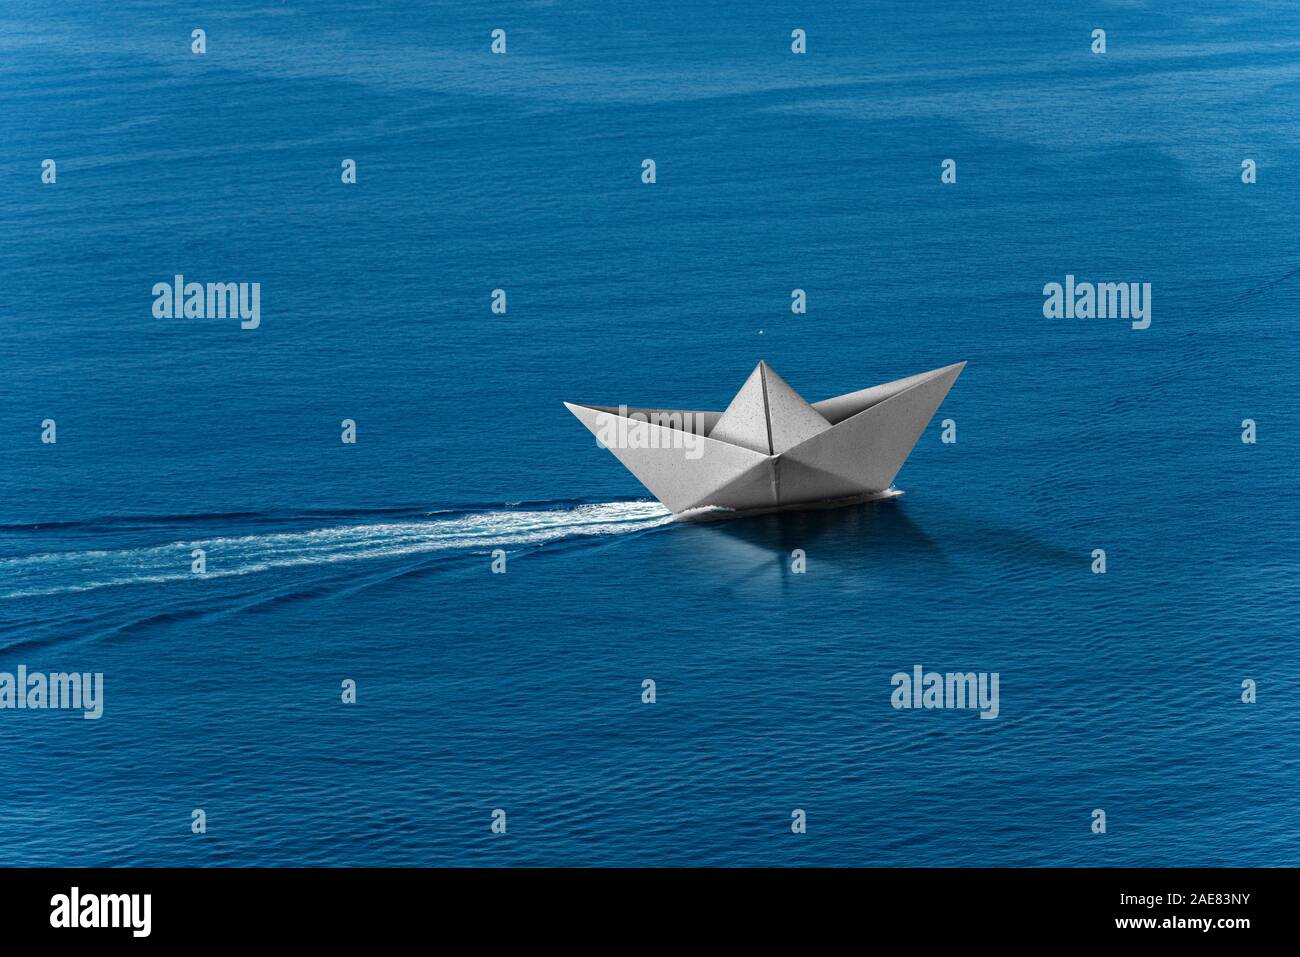 White paper boat runs fast over the blue sea with wake, photography aerial view Stock Photo